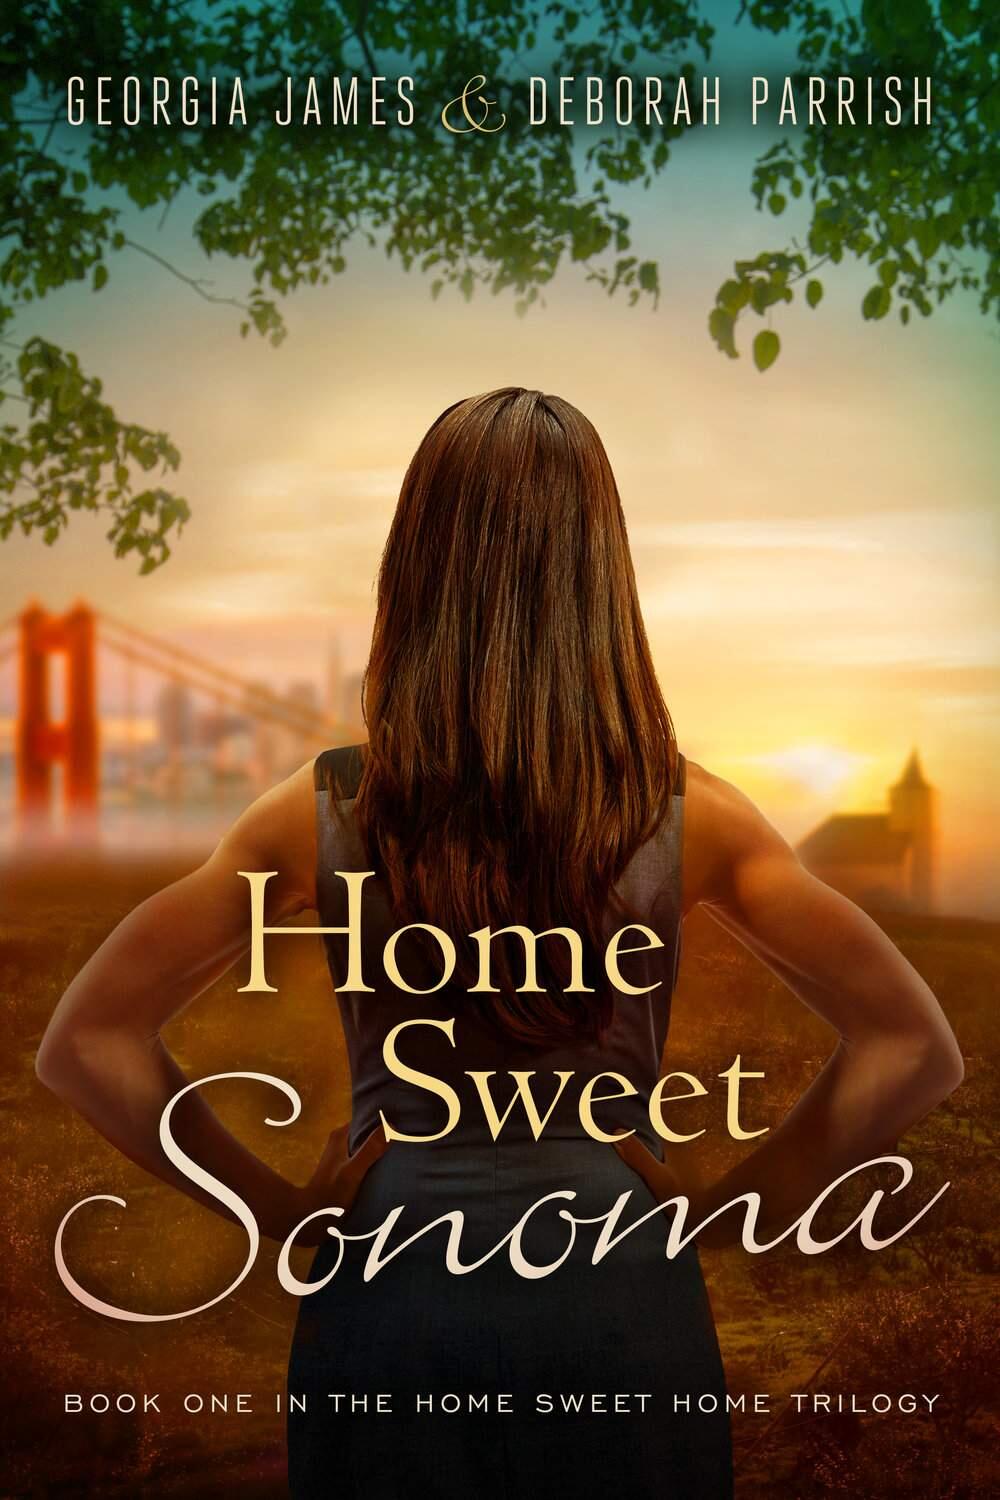 Locally-set romance 'Home Sweet Sonoma' is the Number Eight bestselling book this week in Petaluma.